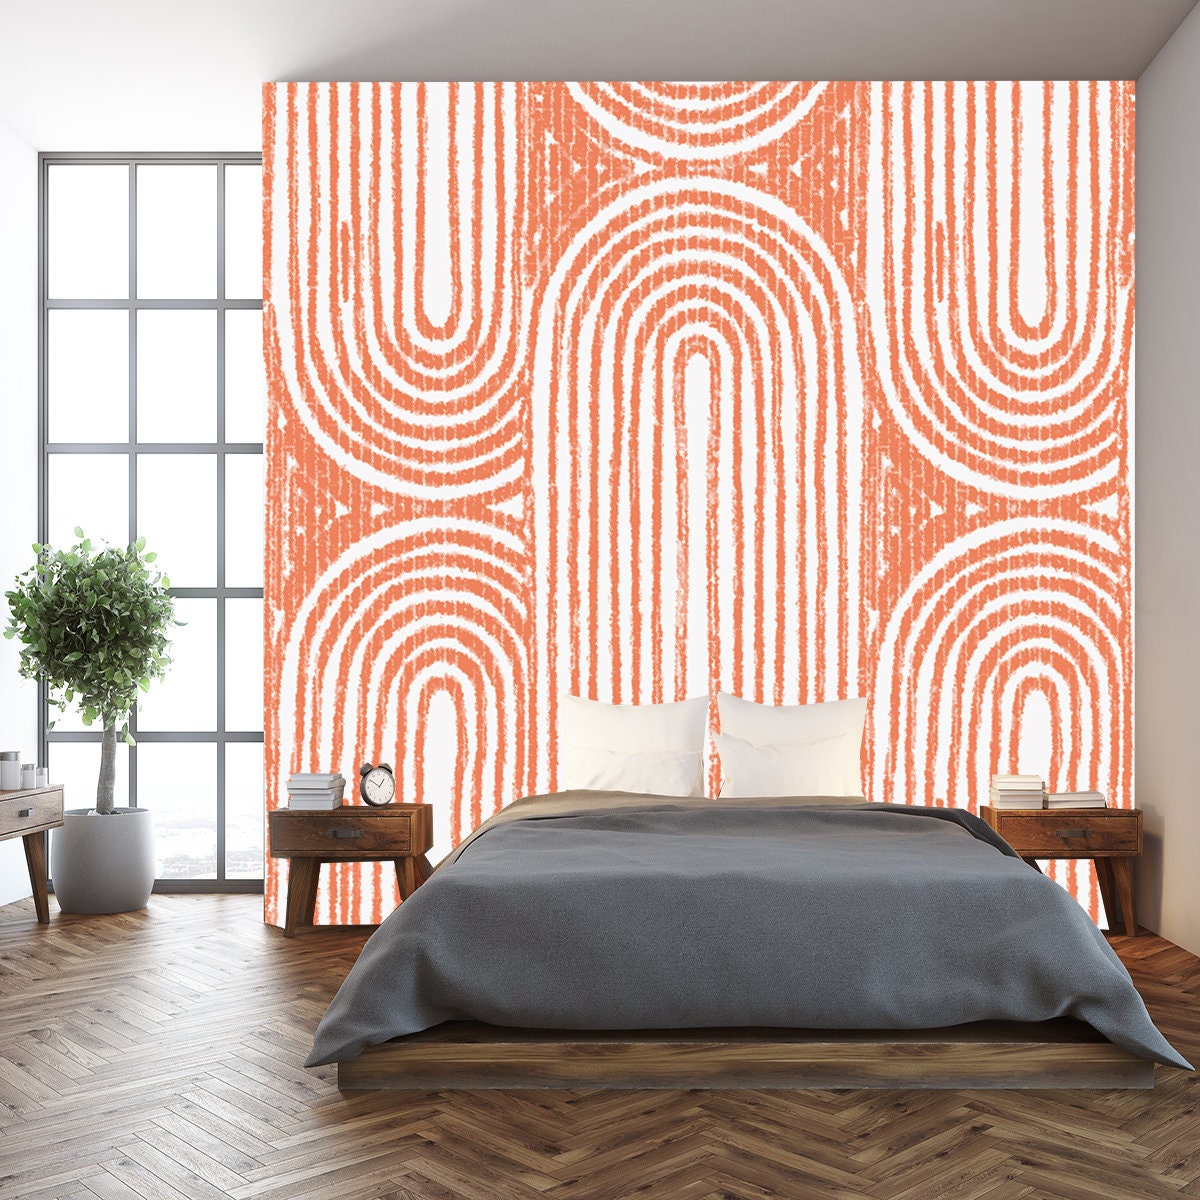 Modern Trendy Mid Century Abstract Shapes Monochrome Seamless Pattern. Geometric Textured Repeat Pattern Wallpaper Bedroom Mural